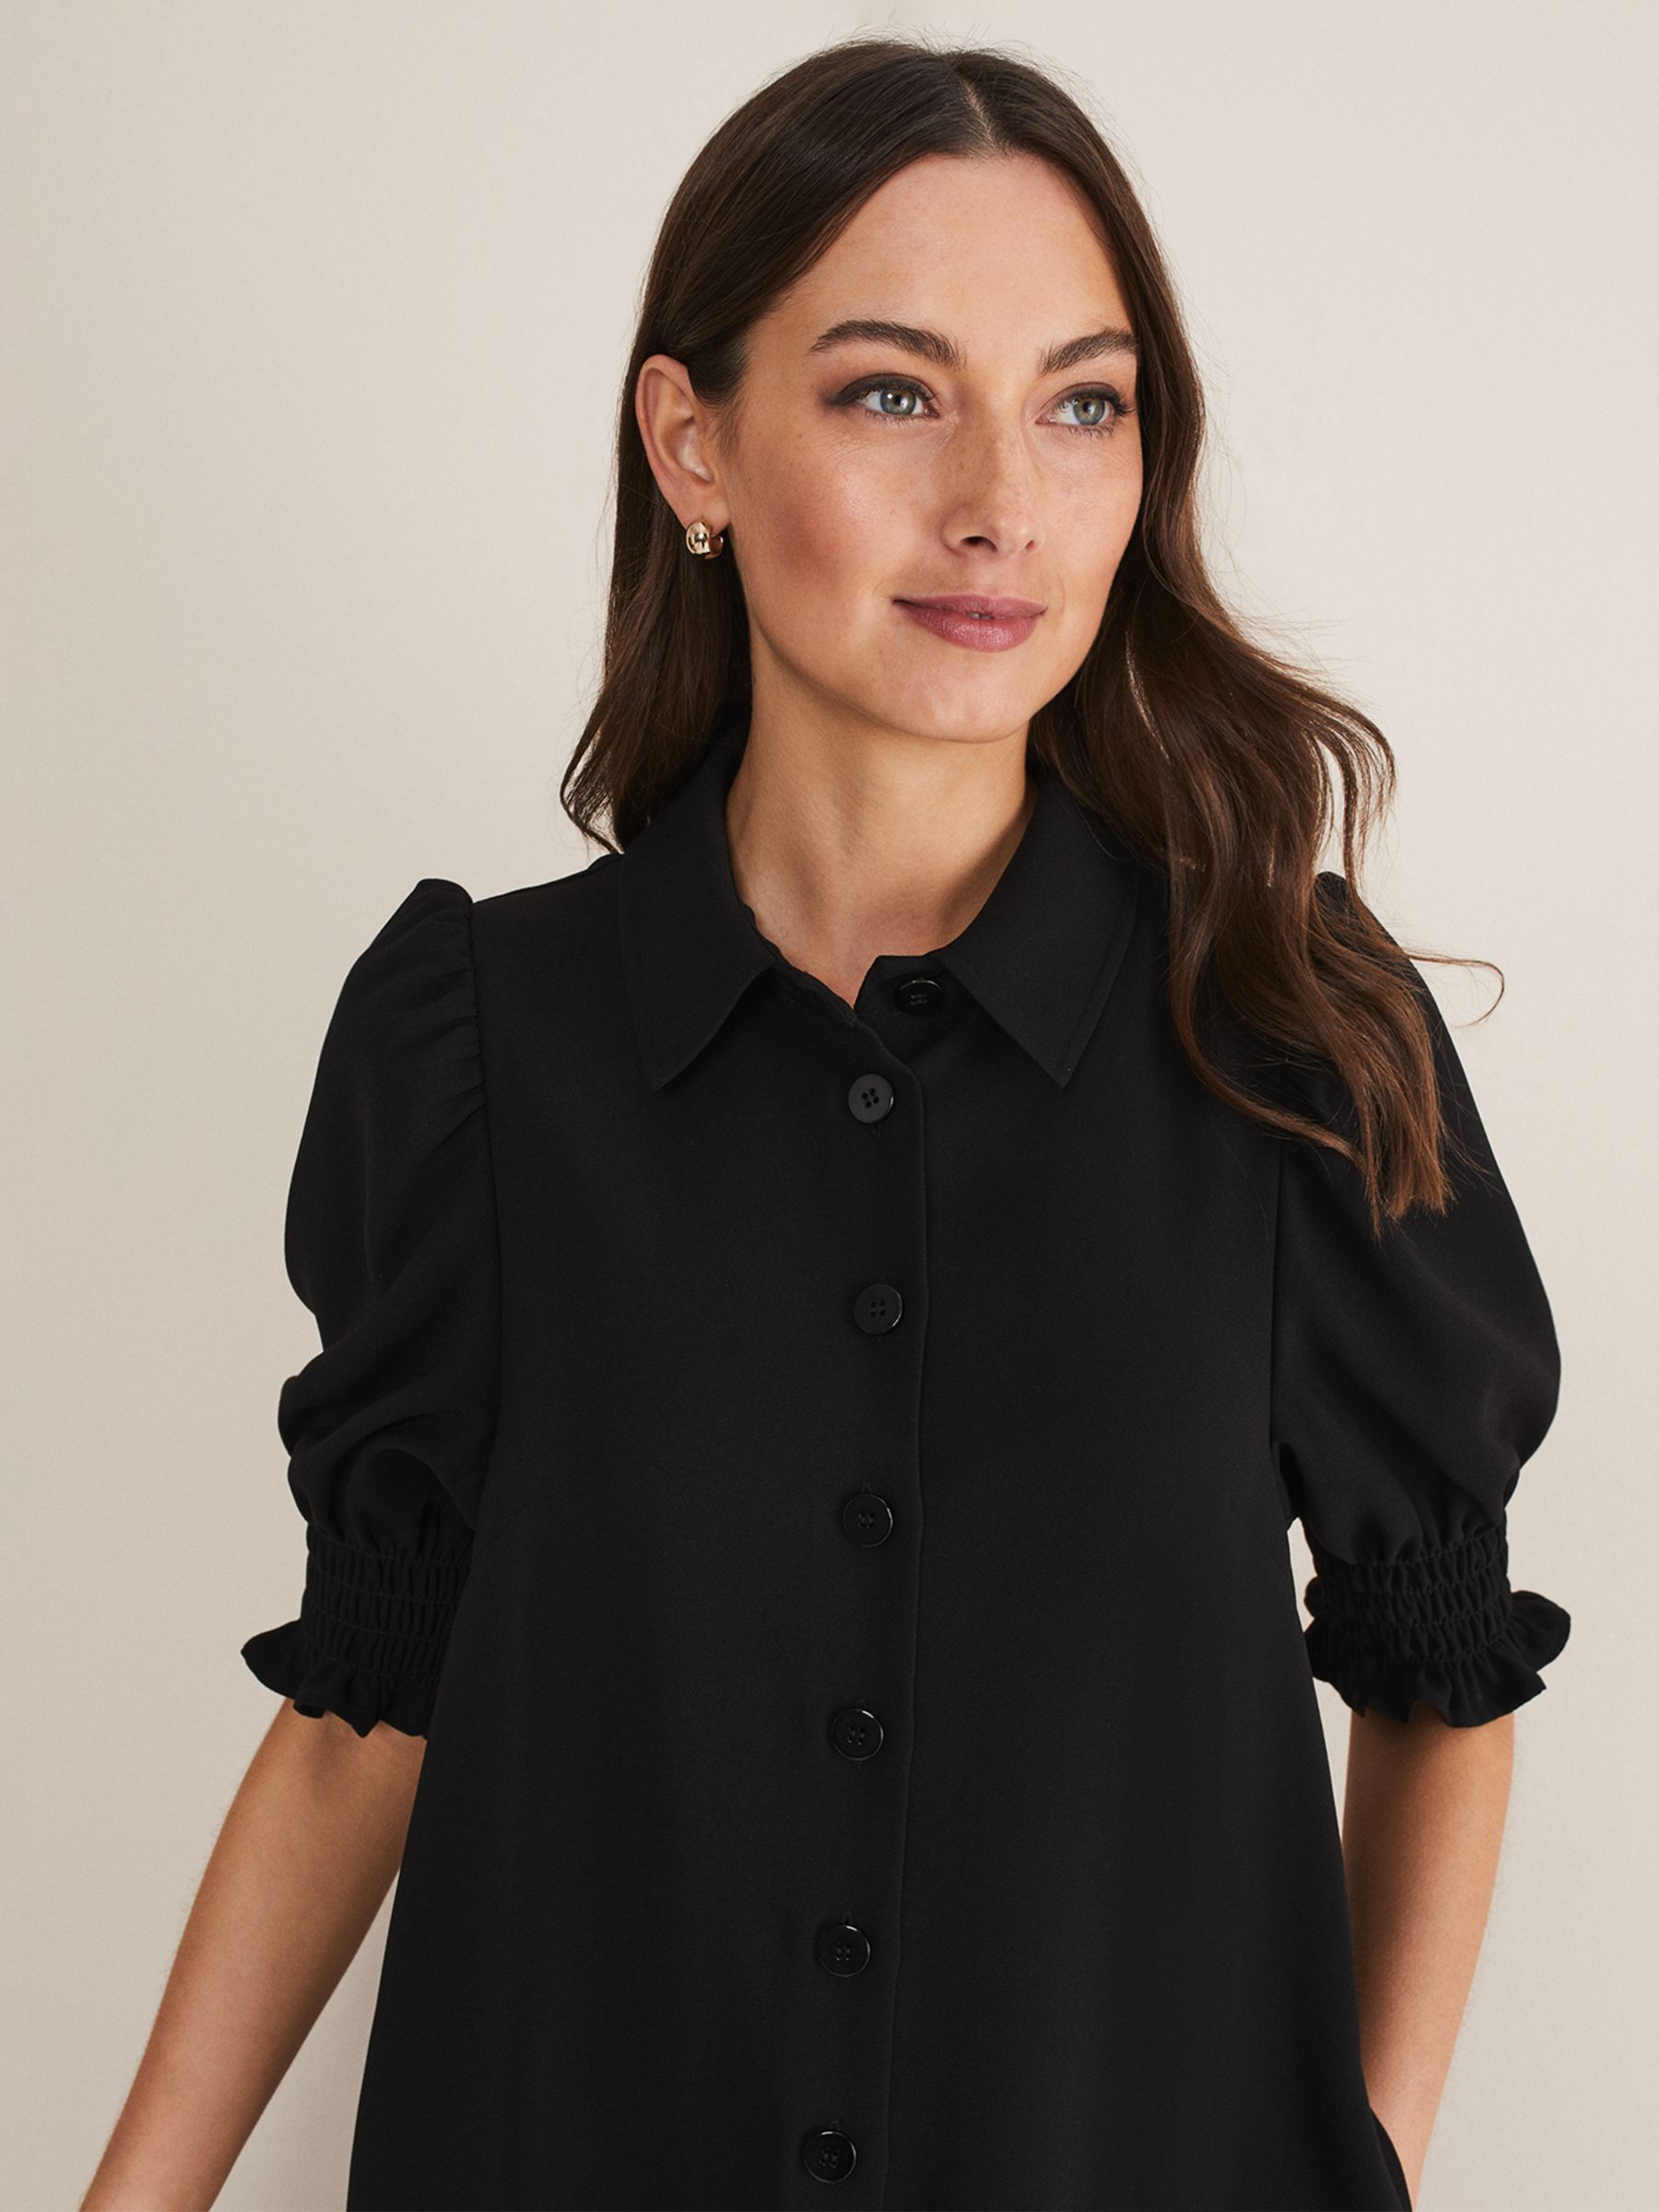 Buy Phase Eight Candice Puff Sleeve Shirt Dress Online at johnlewis.com